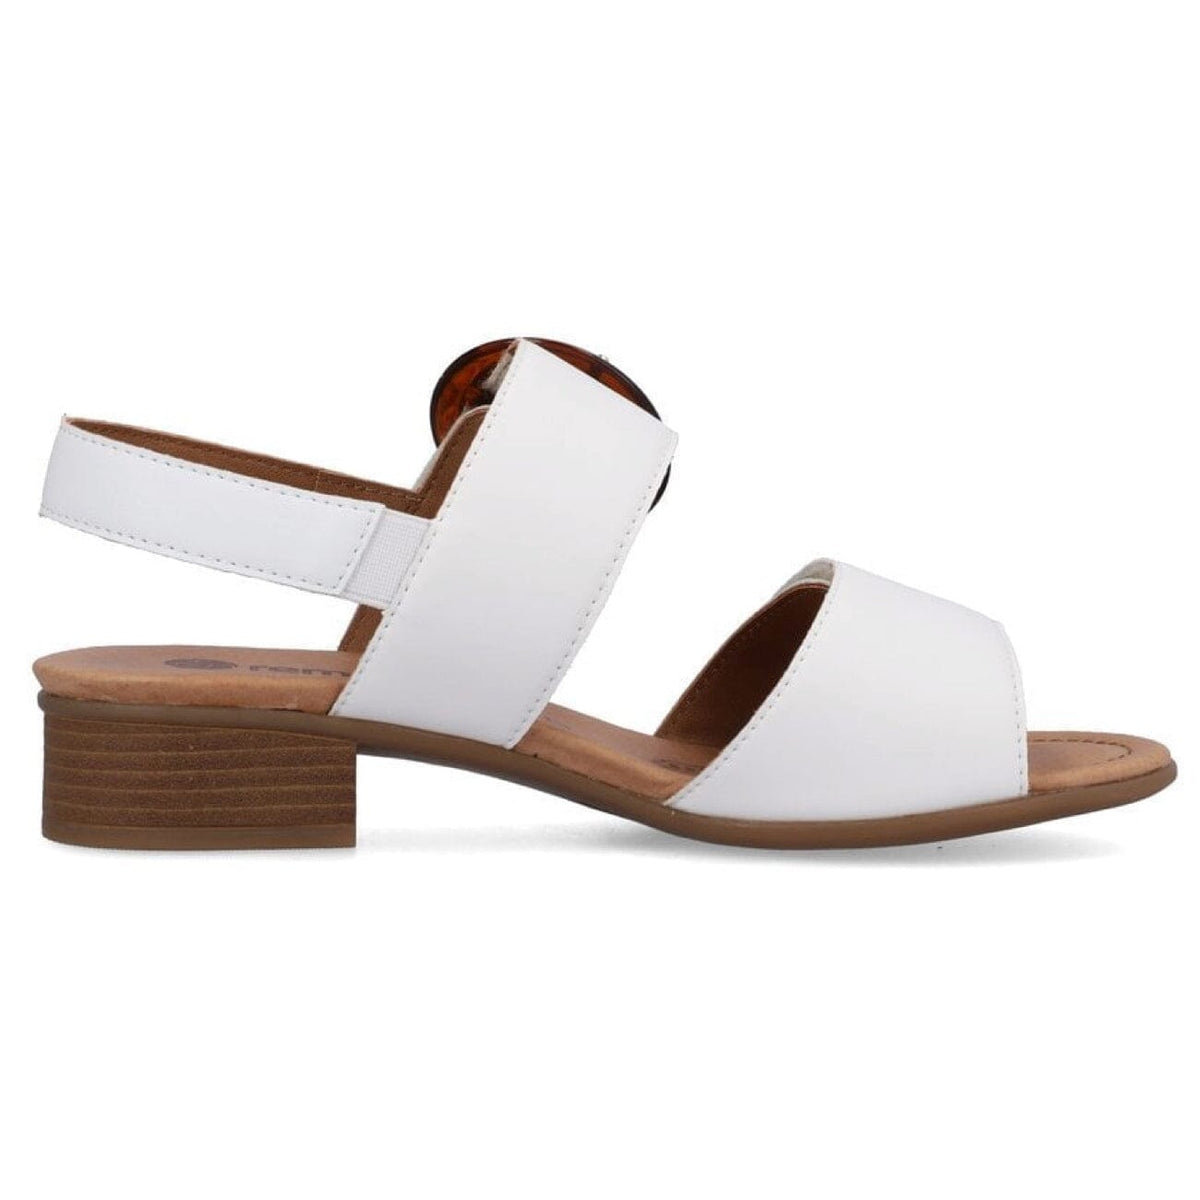 Remonte, Weiss Sandal, Leather, White/Weiss Sandals Remonte 